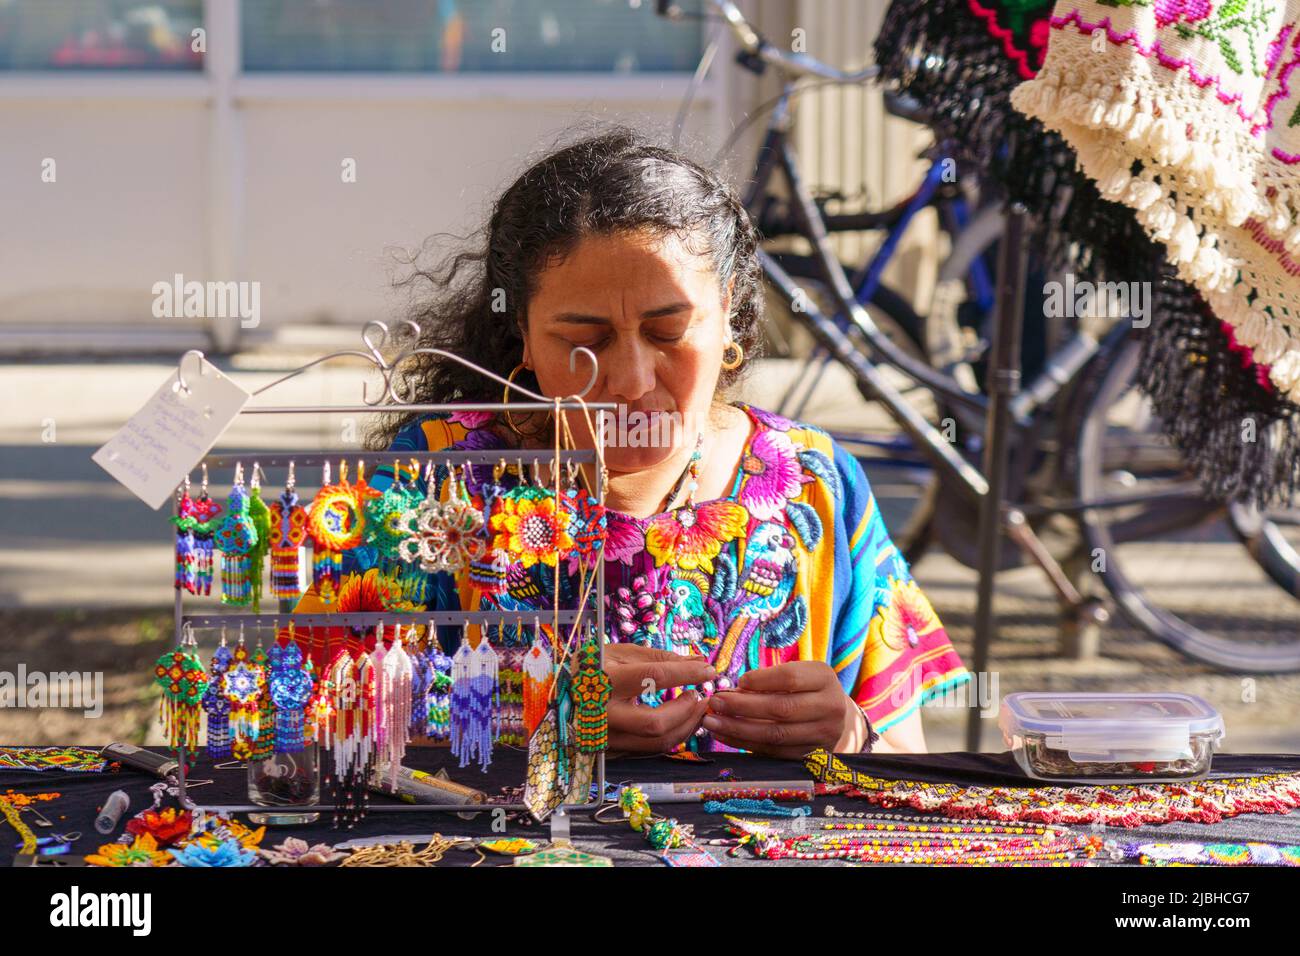 A woman of Latin American ethnicity knits souvenirs in a kiosk that she operates during the Do West Festival Stock Photo